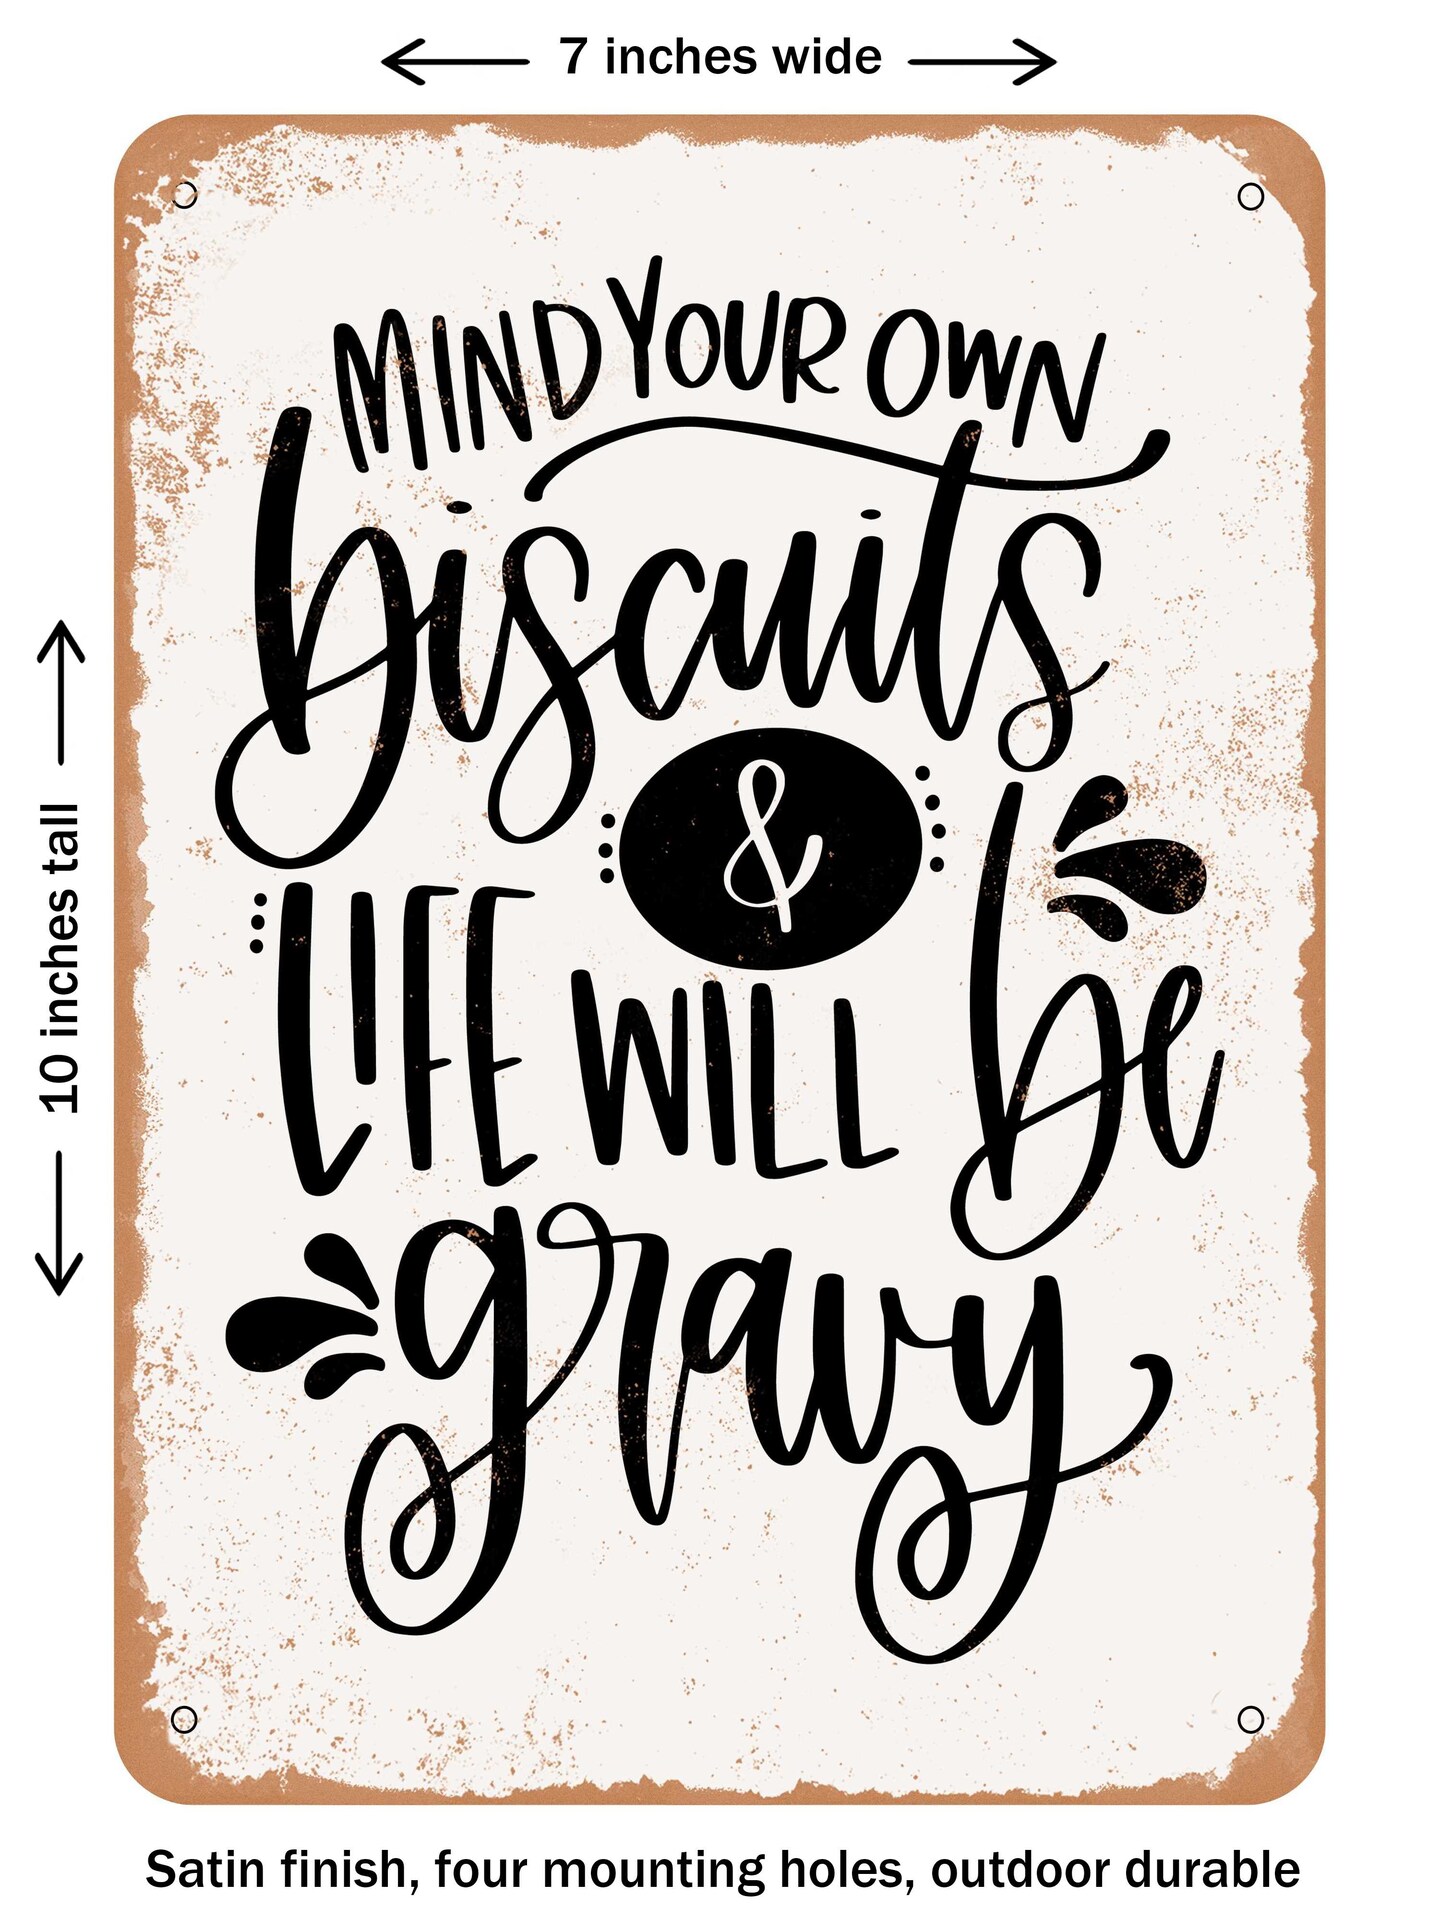 DECORATIVE METAL SIGN - Mind Your Own Biscuits  - Vintage Rusty Look